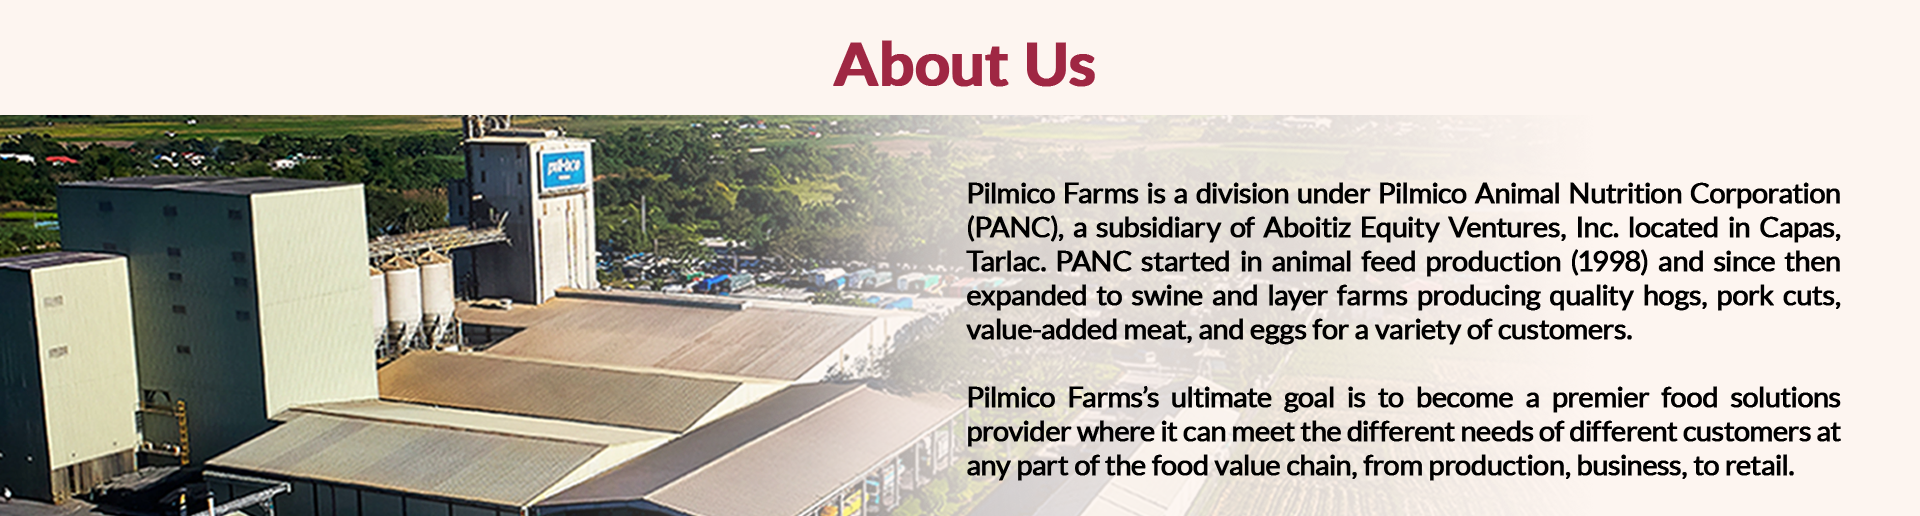 About The Good Meat and Pilmico Farms